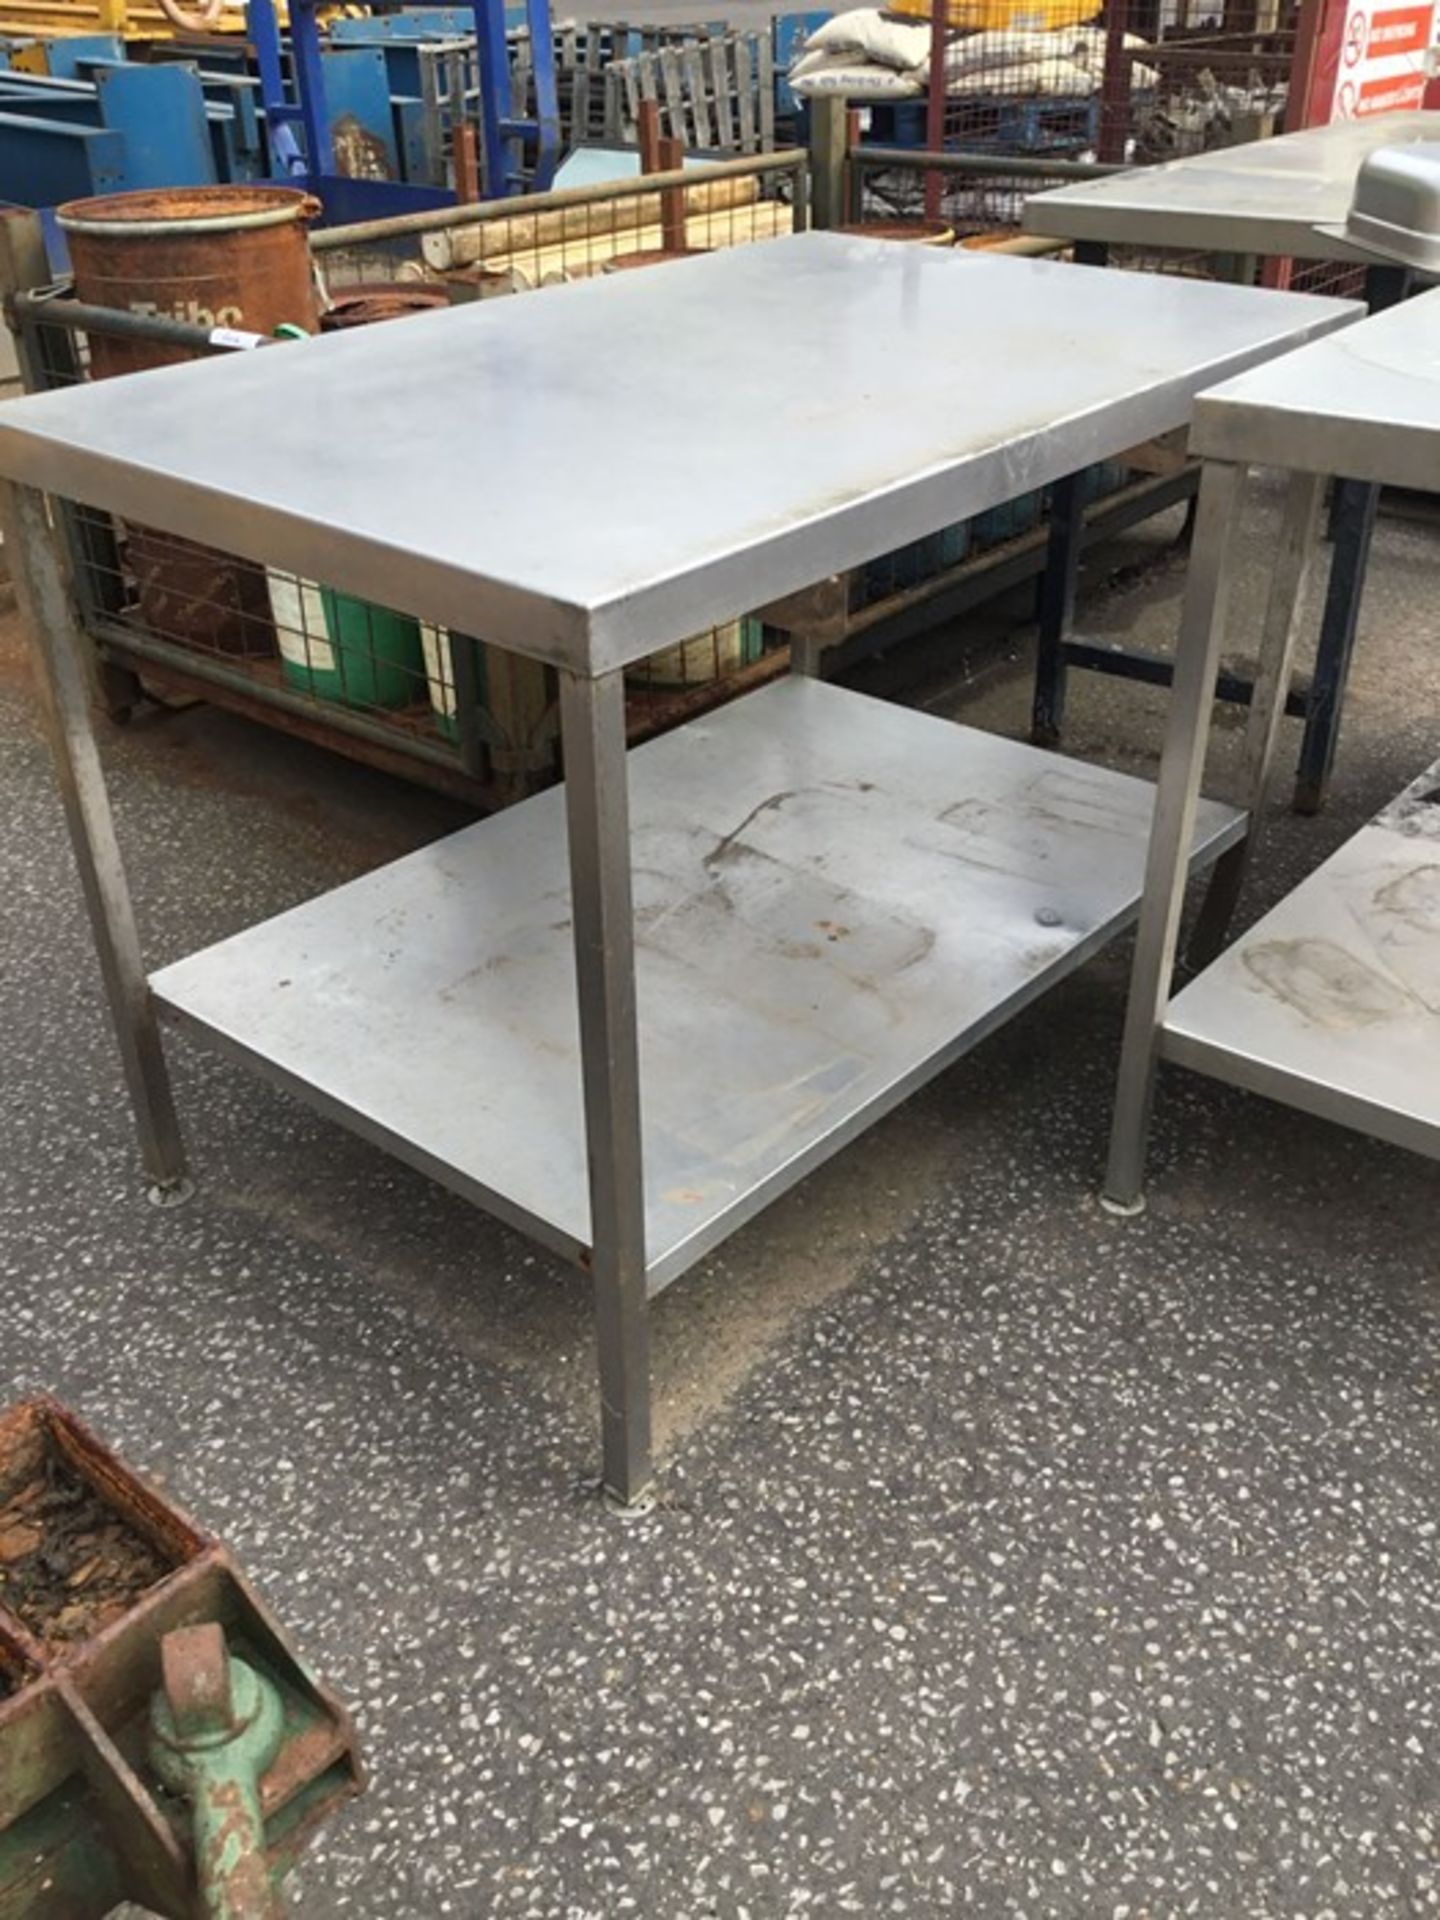 3 stainless steel catering tables - Image 2 of 2